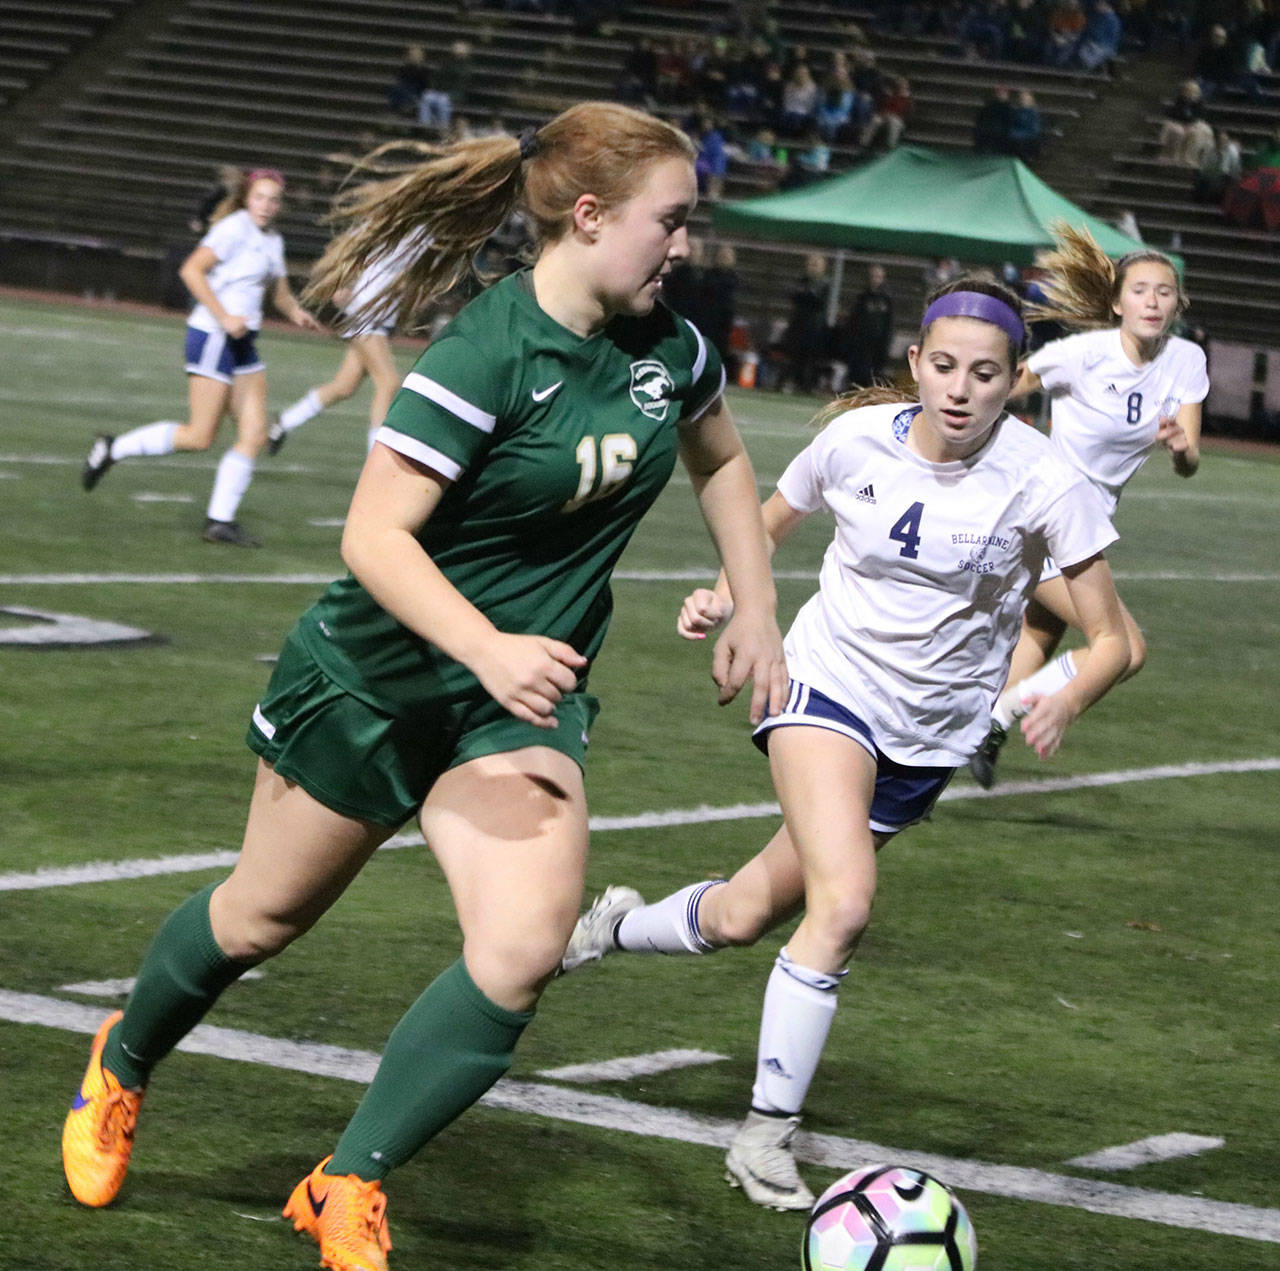 Redmond’s Lindsey Honhart (16), left, dribbles the ball up field against Bellarmine Prep. Andy Nystrom / staff photo